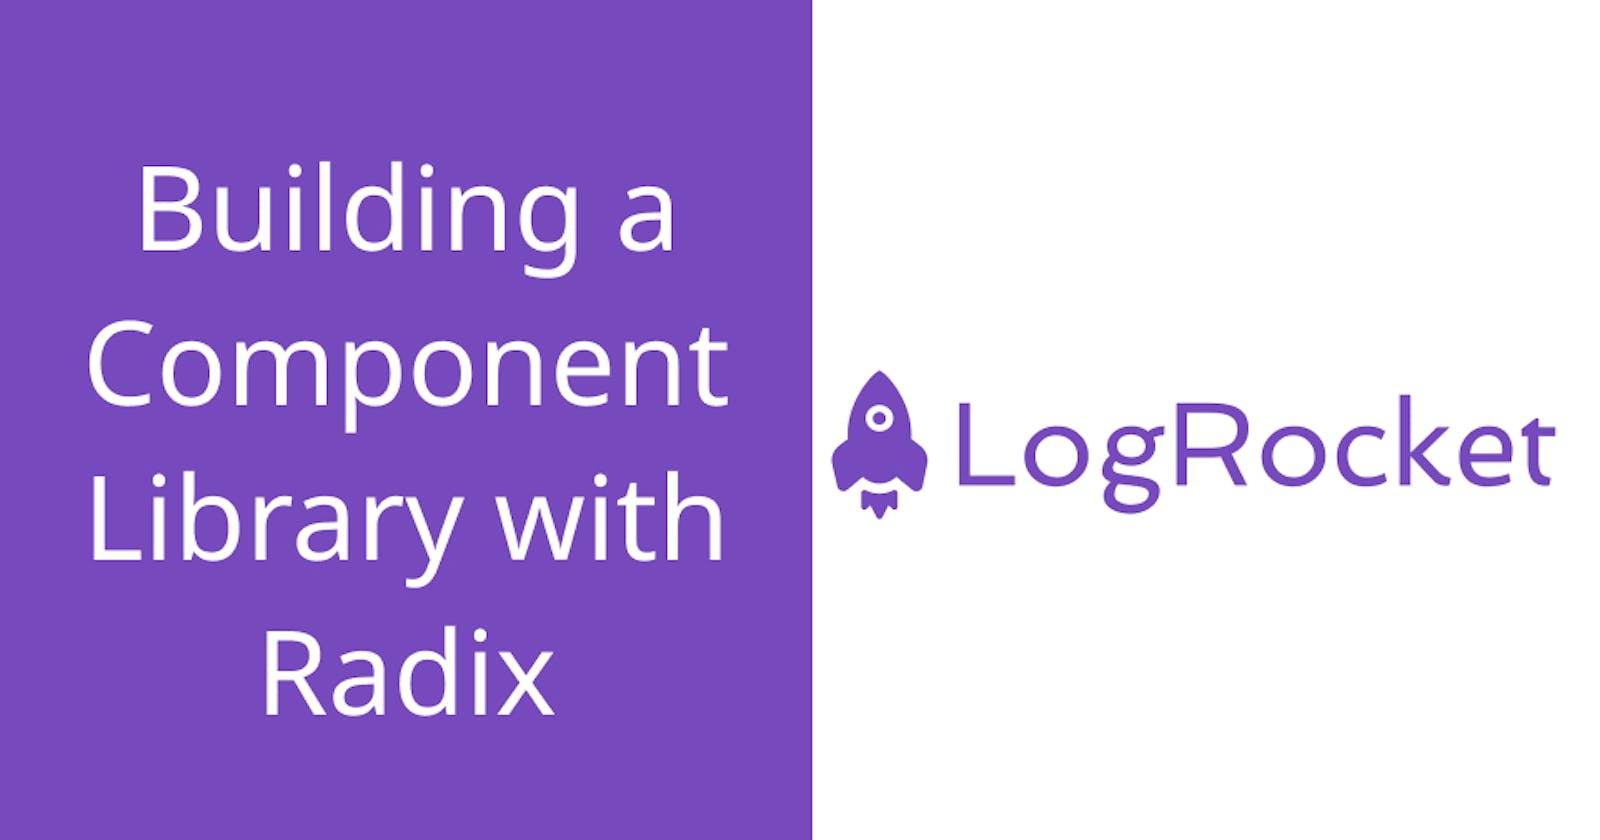 Building a Component Library with Radix